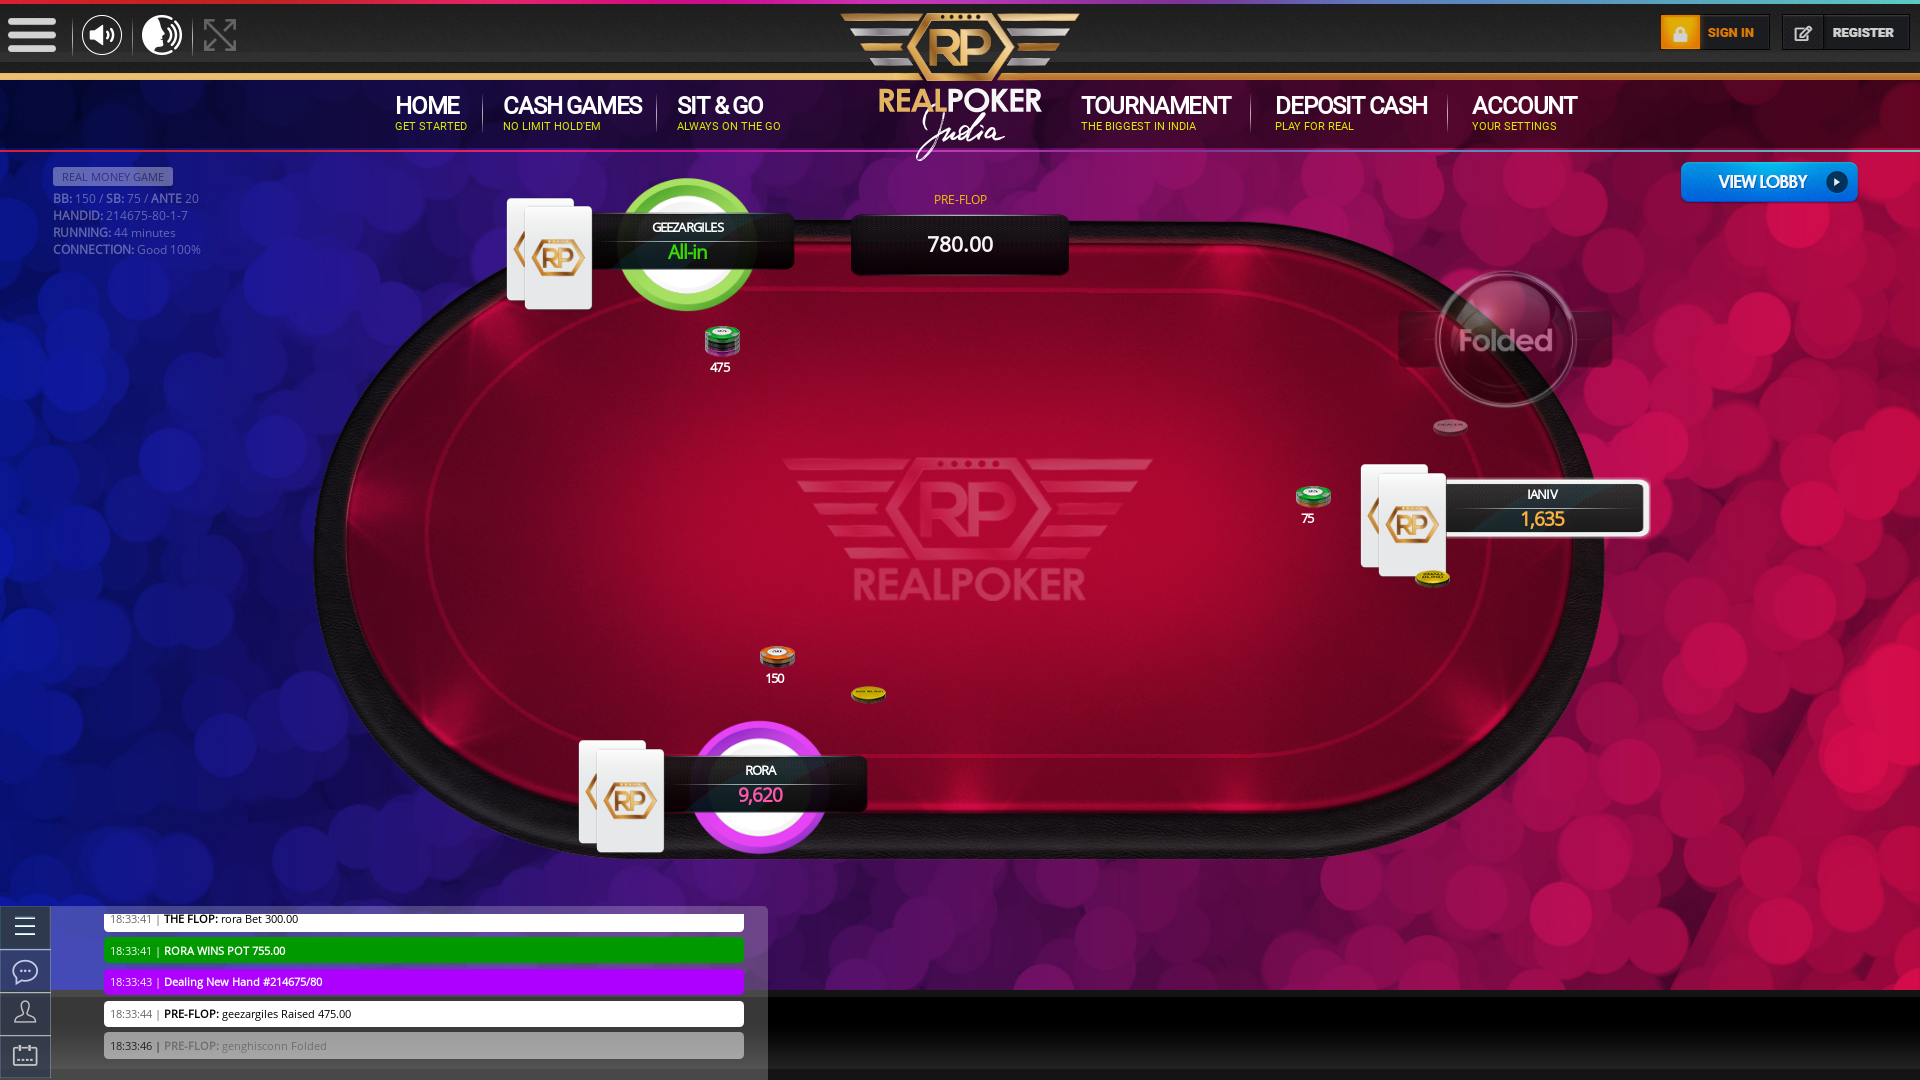 Online poker on a 10 player table in the 44th minute match up